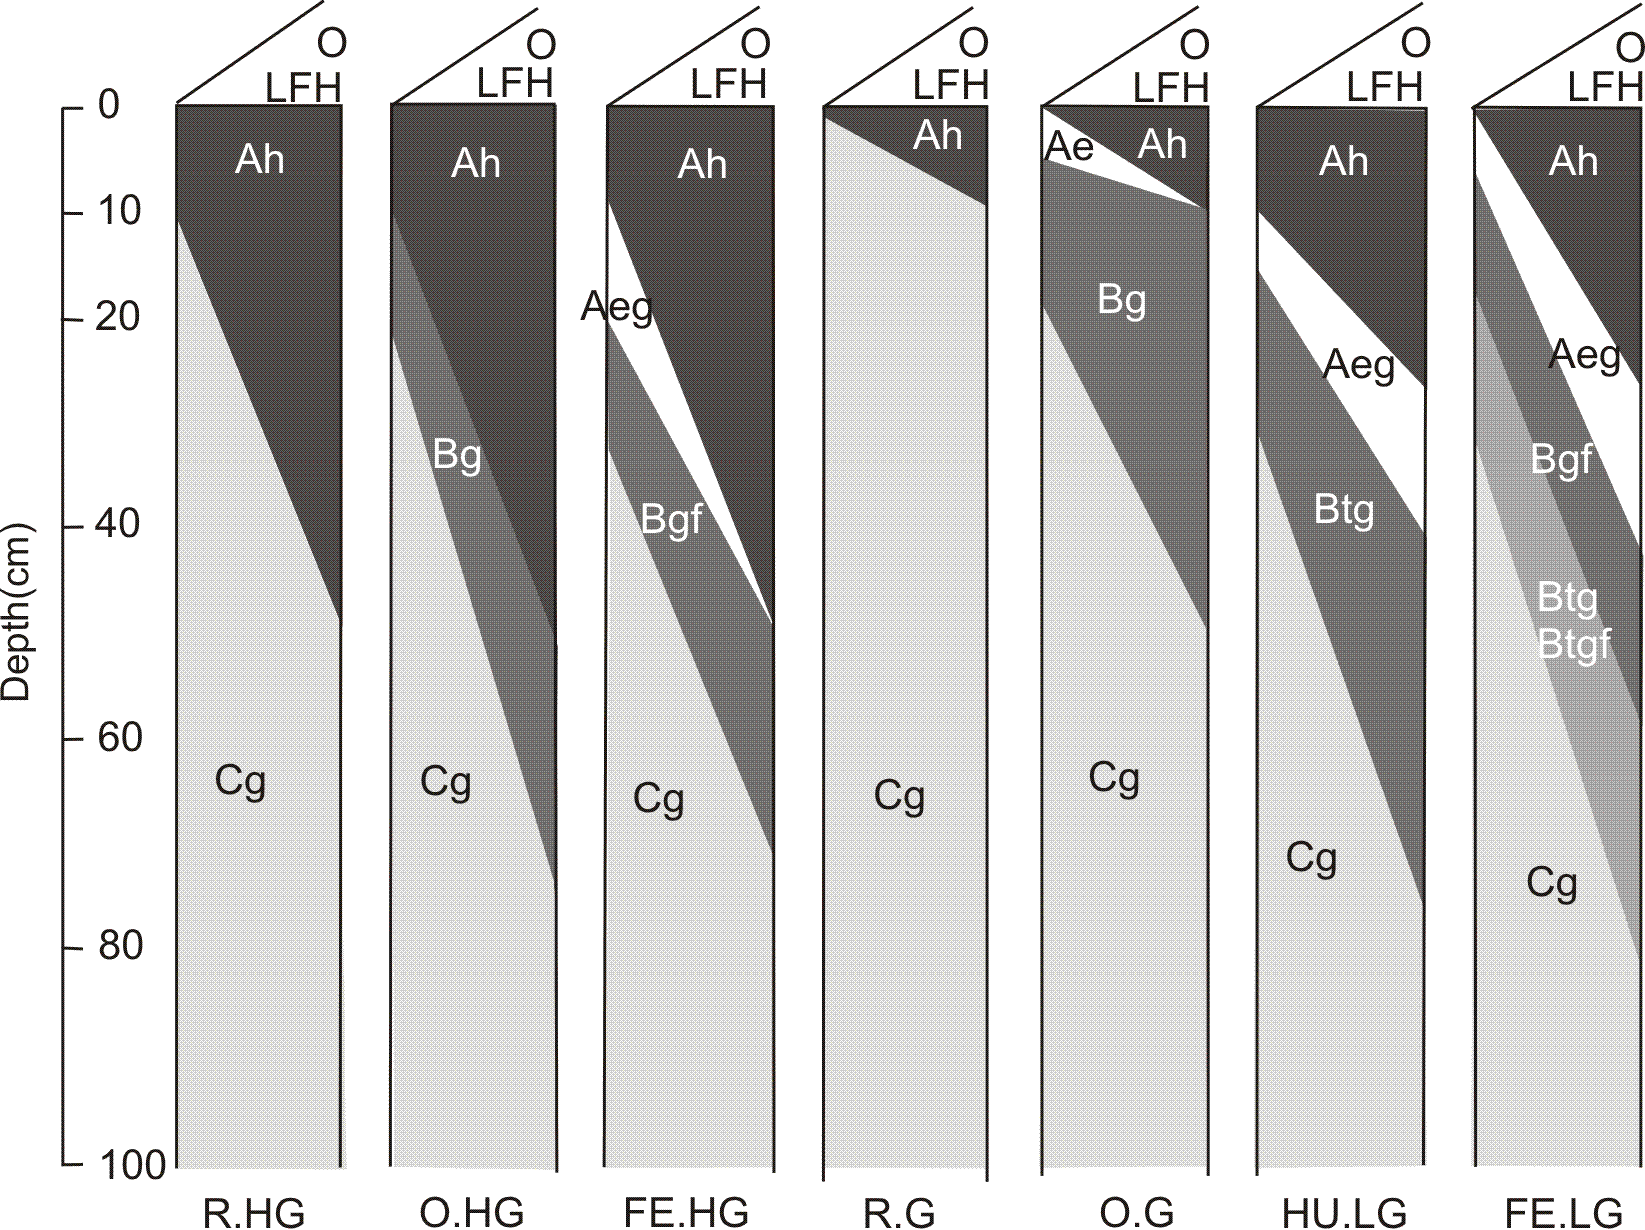 Figure 32 is a Diagrammatic horizon pattern of some subgroups of the Gleysolic order. 
Rego Humic Gleysol (R.HG)
Common horizon sequence: LFH or O, Ah, Cg. These soils have the general properties specified for the Gleysolic order and the Humic Gleysol great group. They differ from Orthic Humic Gleysols in that they lack a B horizon at least 10 cm thick. Typically, they have a well-developed Ah horizon overlying a gleyed C horizon.
Orthic Humic Gleysol (O.HG)
Common horizon sequence: LFH or O, Ah, Bg, Cg. These soils have the general properties specified for the Gleysolic order and the Humic Gleysol great group. Typically, they have a well-developed Ah horizon overlying gleyed B and C horizons. They may have organic surface horizons, an eluvial horizon, and a C horizon that does not have the dull colors and mottling that indicate gleying. Orthic Humic Gleysols are identified by the following properties:
1.	They have an Ah horizon at least 10 cm thick as defined for the great group.
2.	They have a B horizon (Bg or Bgtj) at least 10 cm thick.
3.	They do not have any of the following: a Btg horizon, a solonetzic B horizon, or a Bgf horizon at least 10 cm thick.
Fera Humic Gleysol (FE.HG)
Common horizon sequence: LFH or O, Ah, Aeg, Bgf, Cg. These soils have the general properties specified for the Gleysolic order and the Humic Gleysol great group. They also have a Bgf horizon at least 10 cm thick and lack a solonetzic B horizon. The Bgf horizon contains accumulated hydrous iron oxide (dithionite extractable) thought to have been deposited as a result of the oxidation of ferrous iron. The Bgf horizon usually has many prominent mottles of high chroma.
Rego Gleysol (R.G)
Common horizon sequence: LFH or O, Cg. These soils have the general properties specified for the Gleysolic order and the Gleysol great group. They differ from Orthic Gleysols in that they lack a B horizon at least 10 cm thick. They thus consist of a gleyed C horizon, with or without organic surface horizons, and a thin Ah or B horizon.
Orthic Gleysol (O.G)
Common horizon sequence: LFH or O, Bg, Cg. These soils have the general properties specified for the Gleysolic order and the Gleysol great group. Typically, they have strongly gleyed B and C horizons and may have organic surface horizons and an eluvial horizon. Orthic Gleysols are identified by the following properties:
1.	They have a B horizon (Bg or Btjg) at least 10 cm thick.
2.	They may have an Ah or Ap horizon as specified for the Gleysol great group.
3.	They have neither a Btg horizon, nor a solonetzic B horizon, nor a Bgf horizon at least 10 cm thick.
Humic Luvic Gleysol (HU.LG)
Common horizon sequence: LFH or O, Ah, Aeg, Btg, Cg. These soils have the general properties specified for the Gleysolic order and the Luvic Gleysol great group. They have, in addition, a mineral-organic surface horizon that meets the requirements of the Ah or Ap horizon of Humic Gleysols. Thus, the Ah horizon must be at least 10 cm thick and the Ap horizon must be at least 15 cm thick, contain at least 2% organic carbon, and have a darker color than the underlying horizon. Humic Luvic Gleysols have neither a solonetzic B horizon nor a fragipan, but they may have a Bgf horizon.
Fera Luvic Gleysol (FE.LG)
Common horizon sequence: LFH or O, Ah, Aeg, Btgf or Bfg and Btg, Cg. These soils have the general properties specified for the Gleysolic order and the Luvic Gleysol great group. They also have either a Bgf horizon at least 10 cm thick as well as a Btg horizon or a Btgf horizon. A Bgf or Btgf horizon contains accumulated hydrous iron oxide (dithionite extractable), which is thought to have been deposited as a result of the oxidation of ferrous iron. It usually has a high chroma and is commonly a horizon with a concentration of rusty mottles. Fera Luvic Gleysols lack all the following: an Ah or Ap horizon diagnostic of Humic Luvic Gleysols, a solonetzic B horizon, and a fragipan.
.